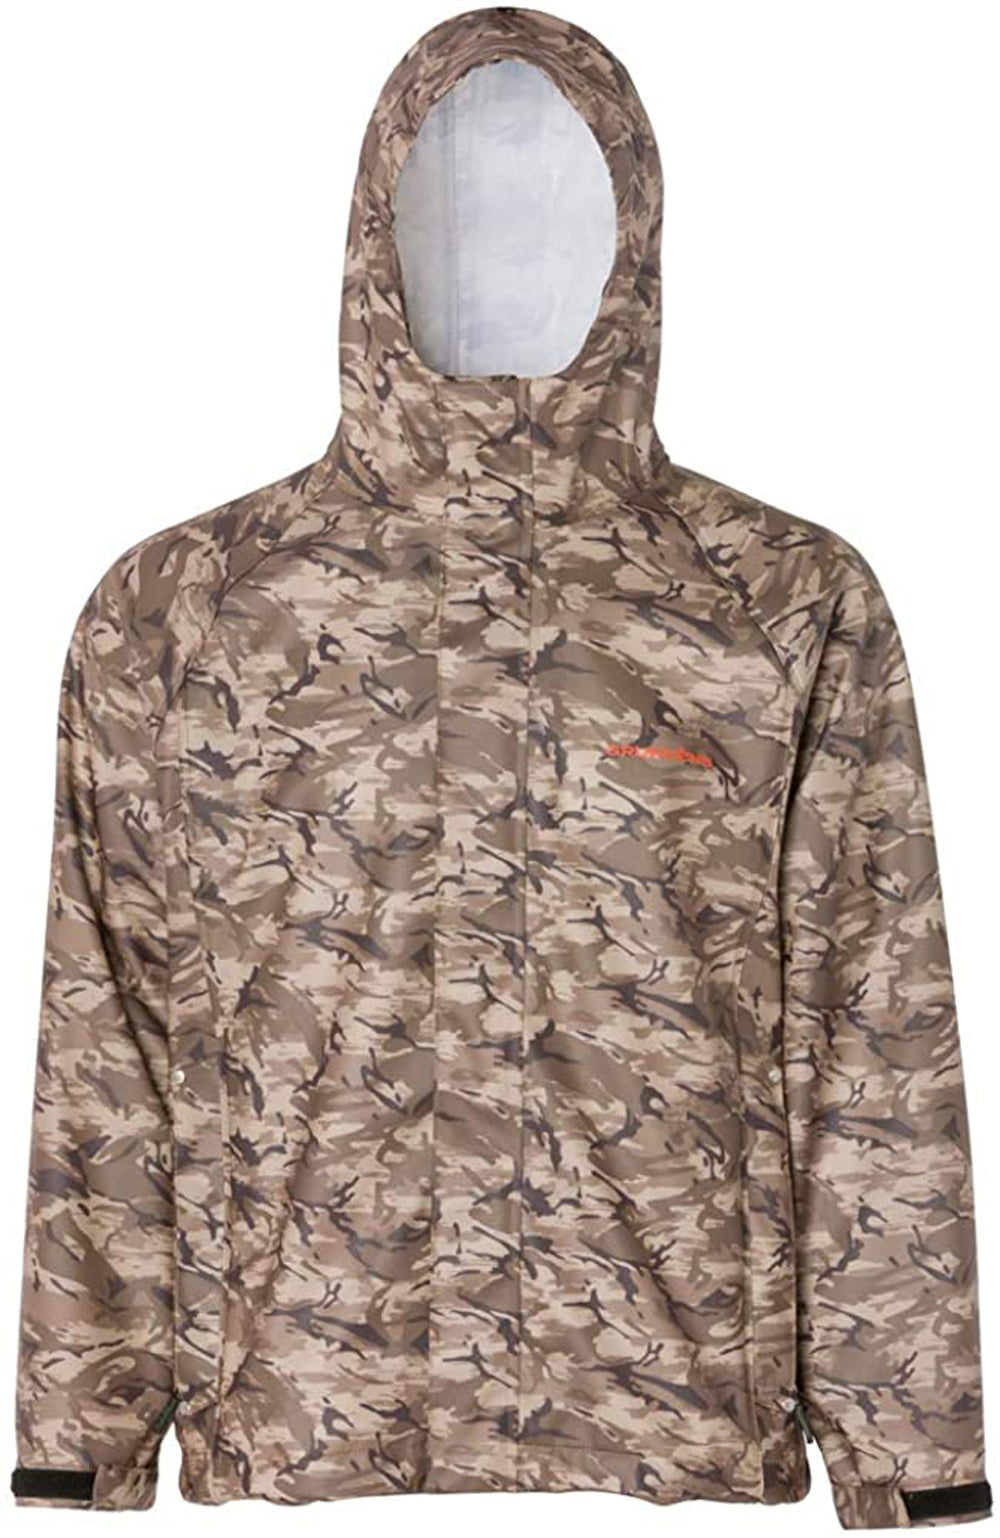 Neptune Jacket in Refraction Camo Stone color from the front view